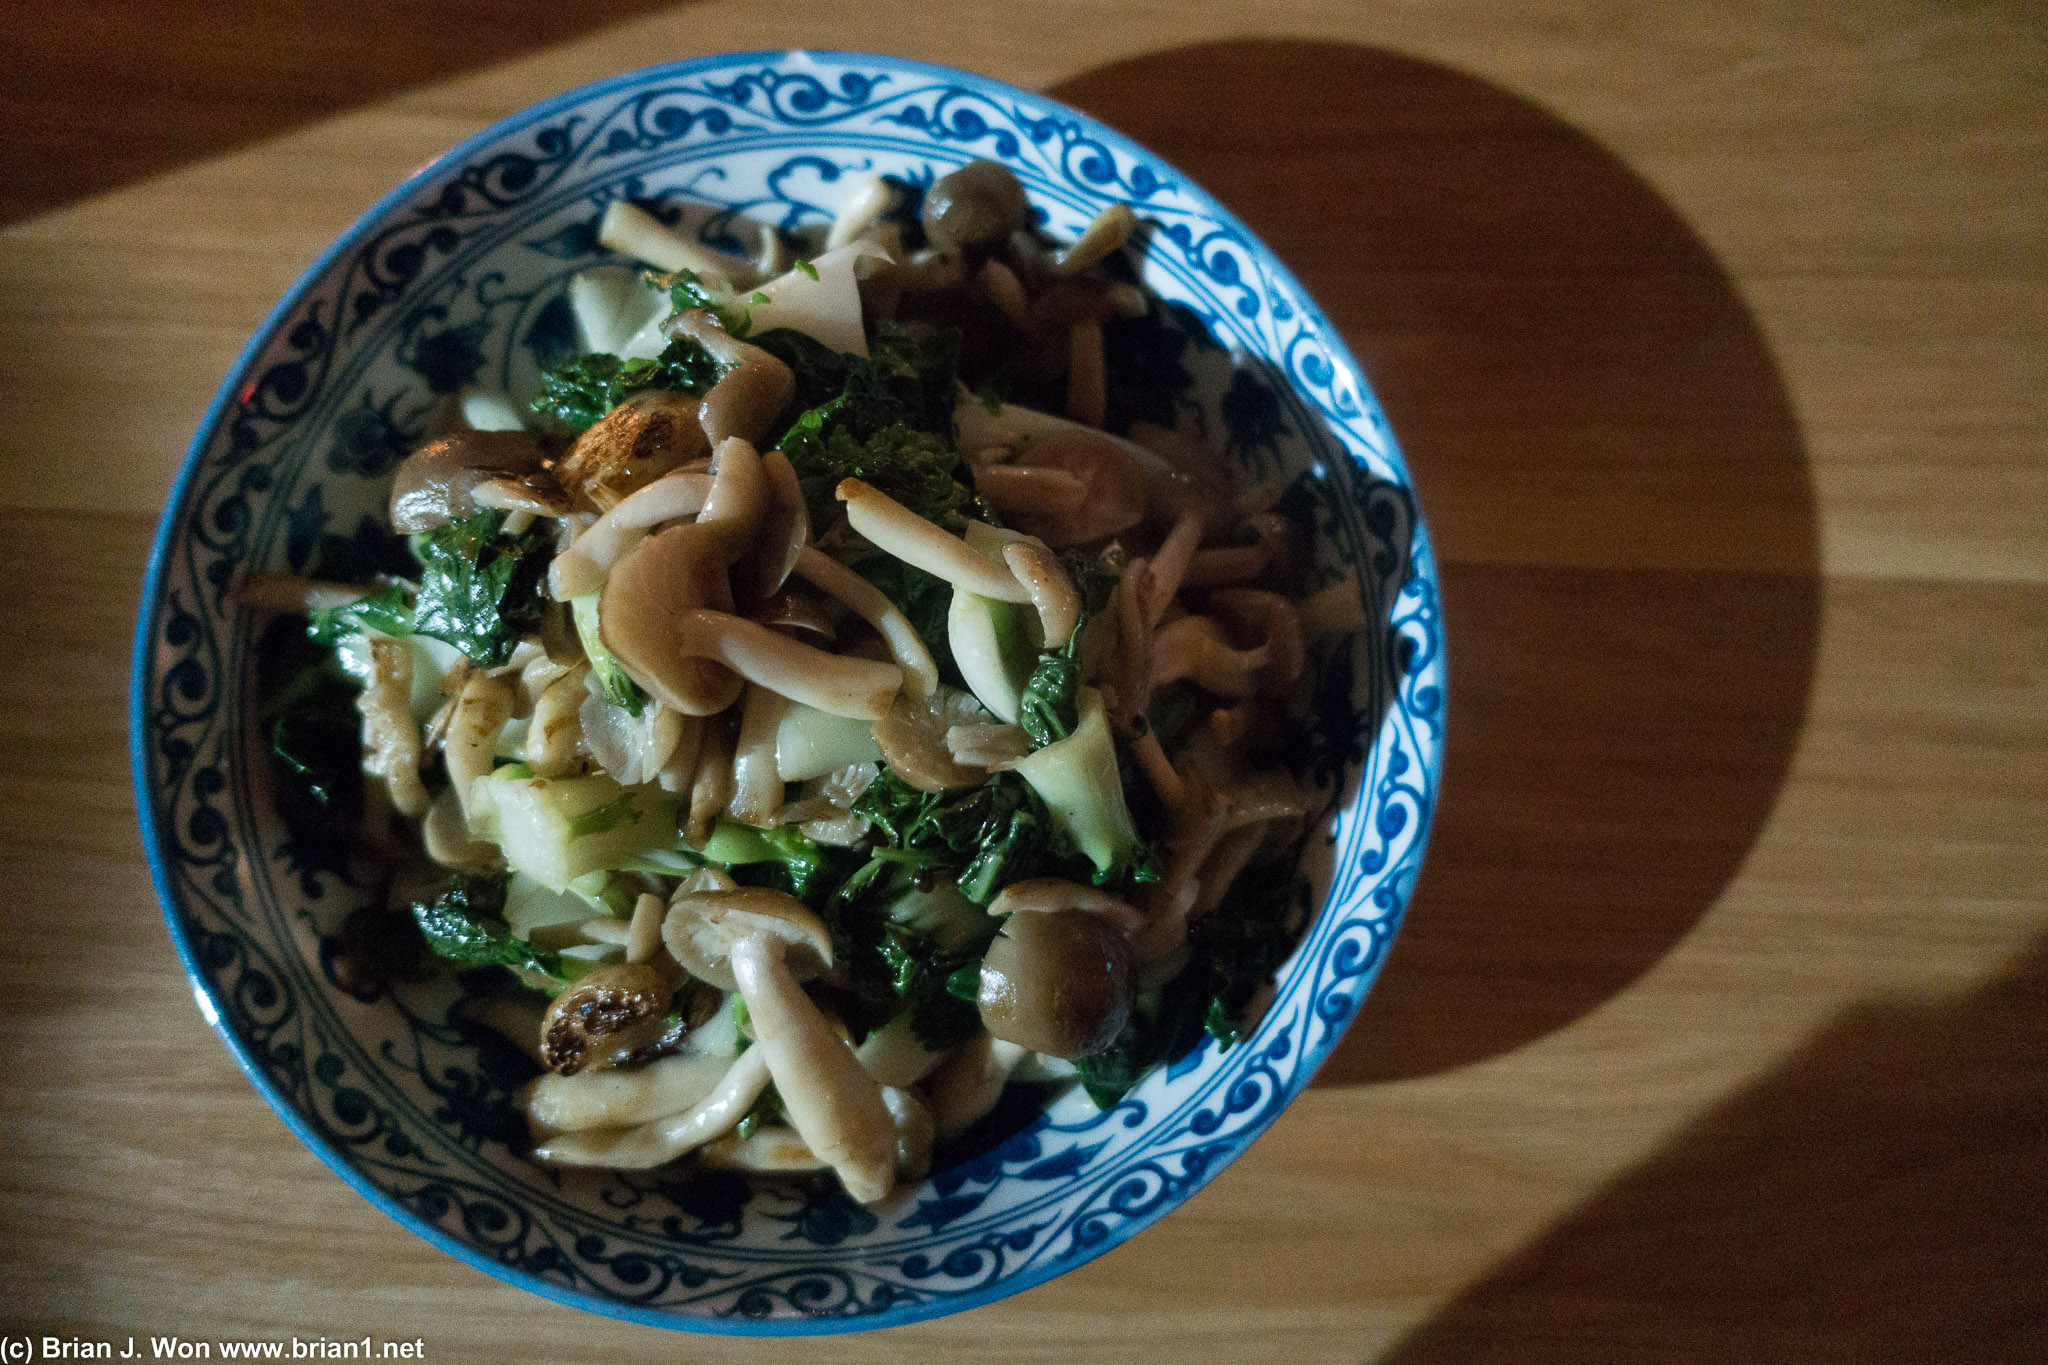 Bok choy and mushrooms were excellent.